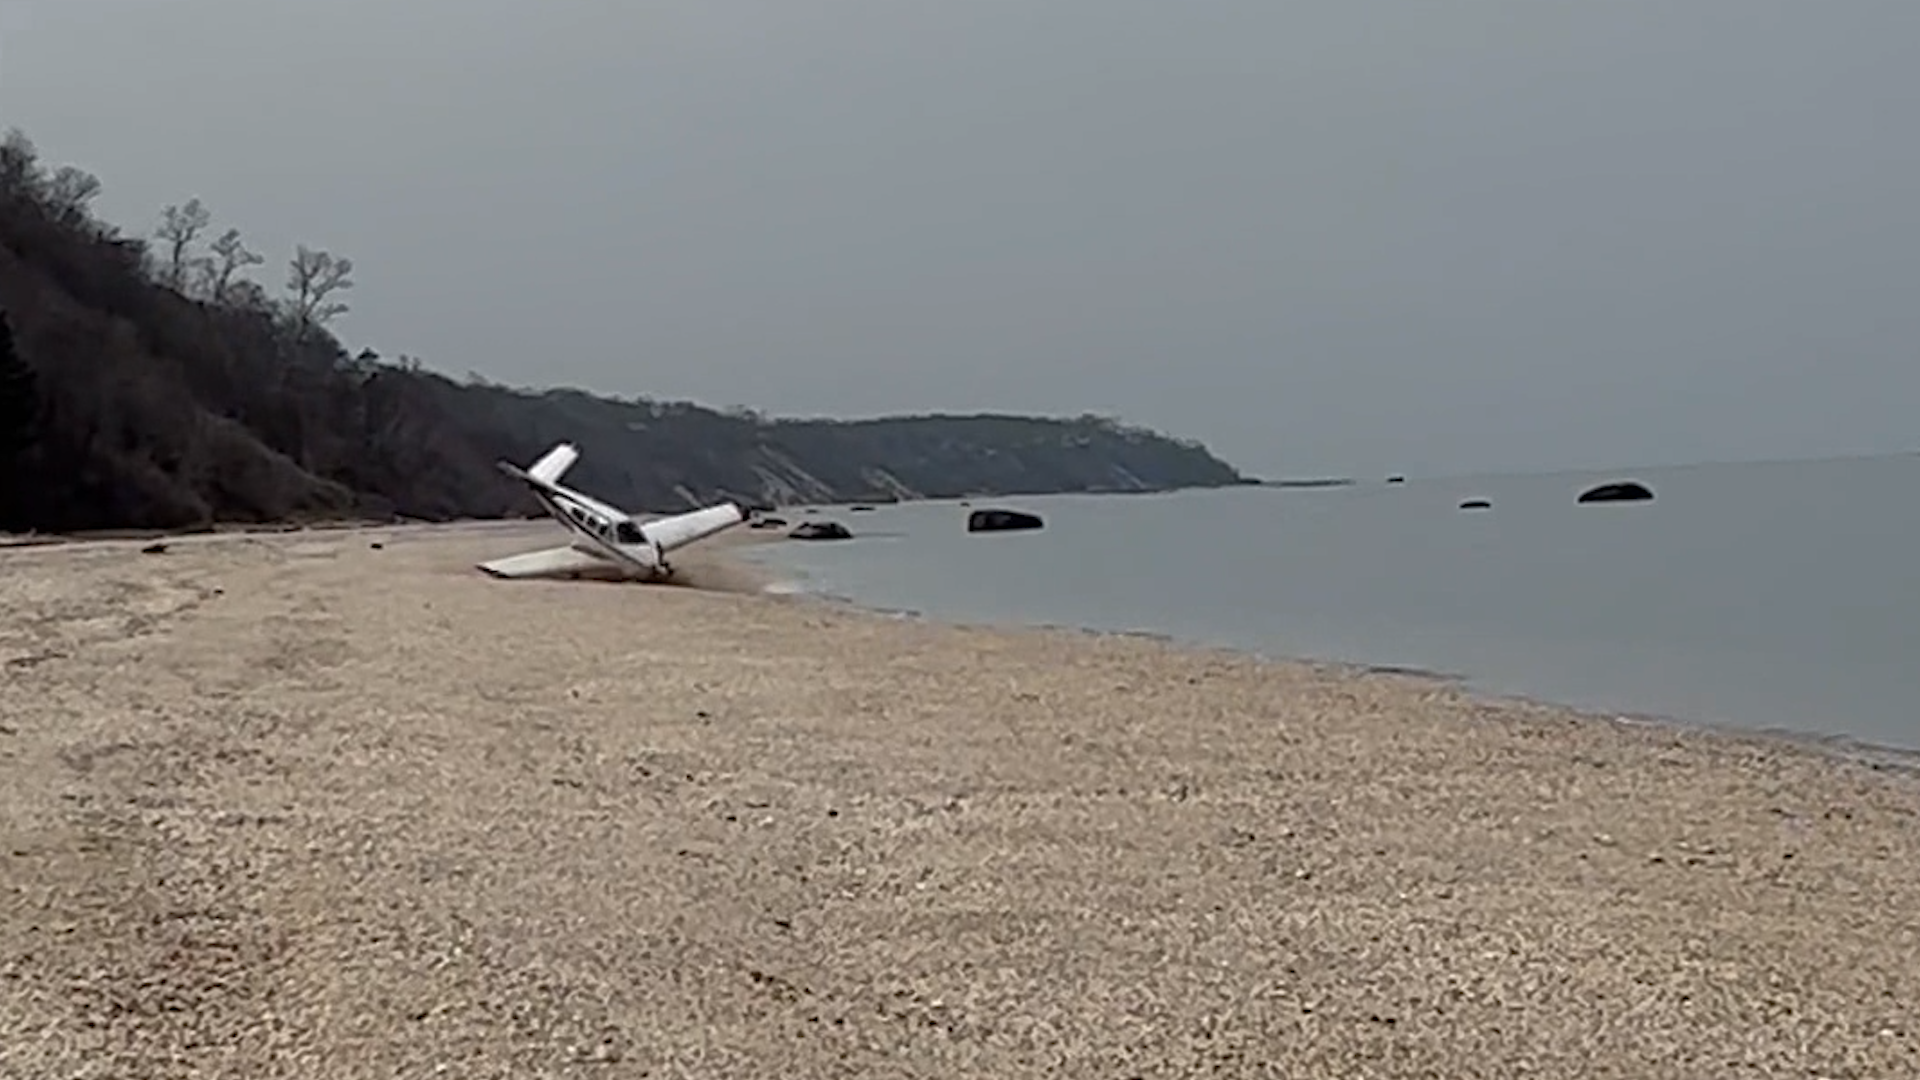 'It's a miracle that we walked away': New York lawmaker makes emergency plane landing on beach